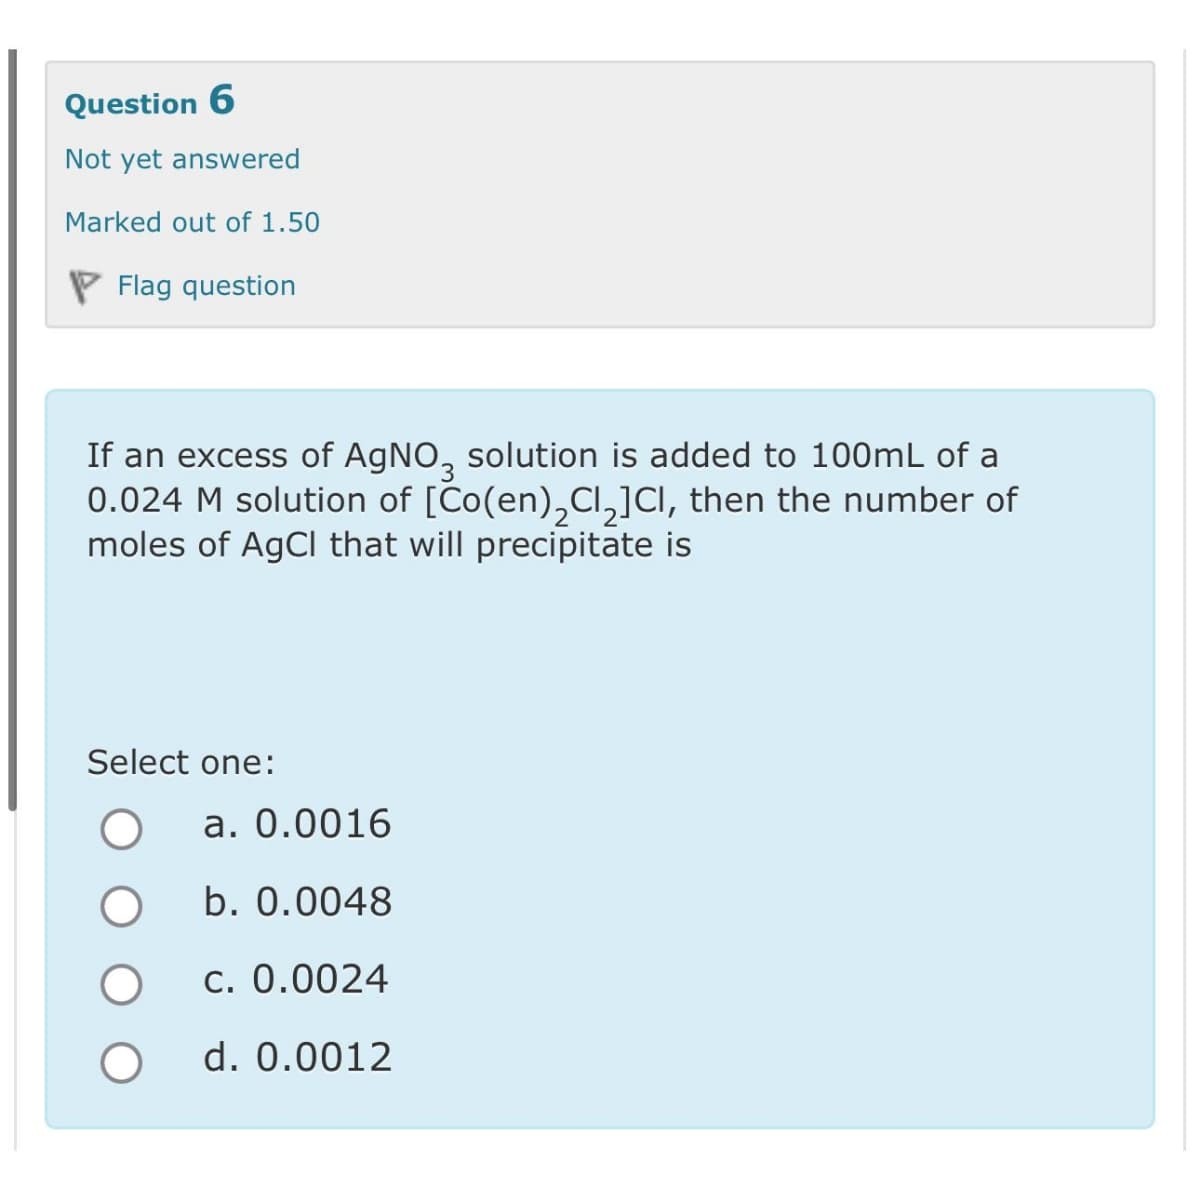 Question 6
Not yet answered
Marked out of 1.50
Flag question
If an excess of AgNO3 solution is added to 100mL of a
0.024 M solution of [Co(en) Cl₂]CI, then the number of
moles of AgCl that will precipitate is
Select one:
O
a. 0.0016
b. 0.0048
c. 0.0024
d. 0.0012